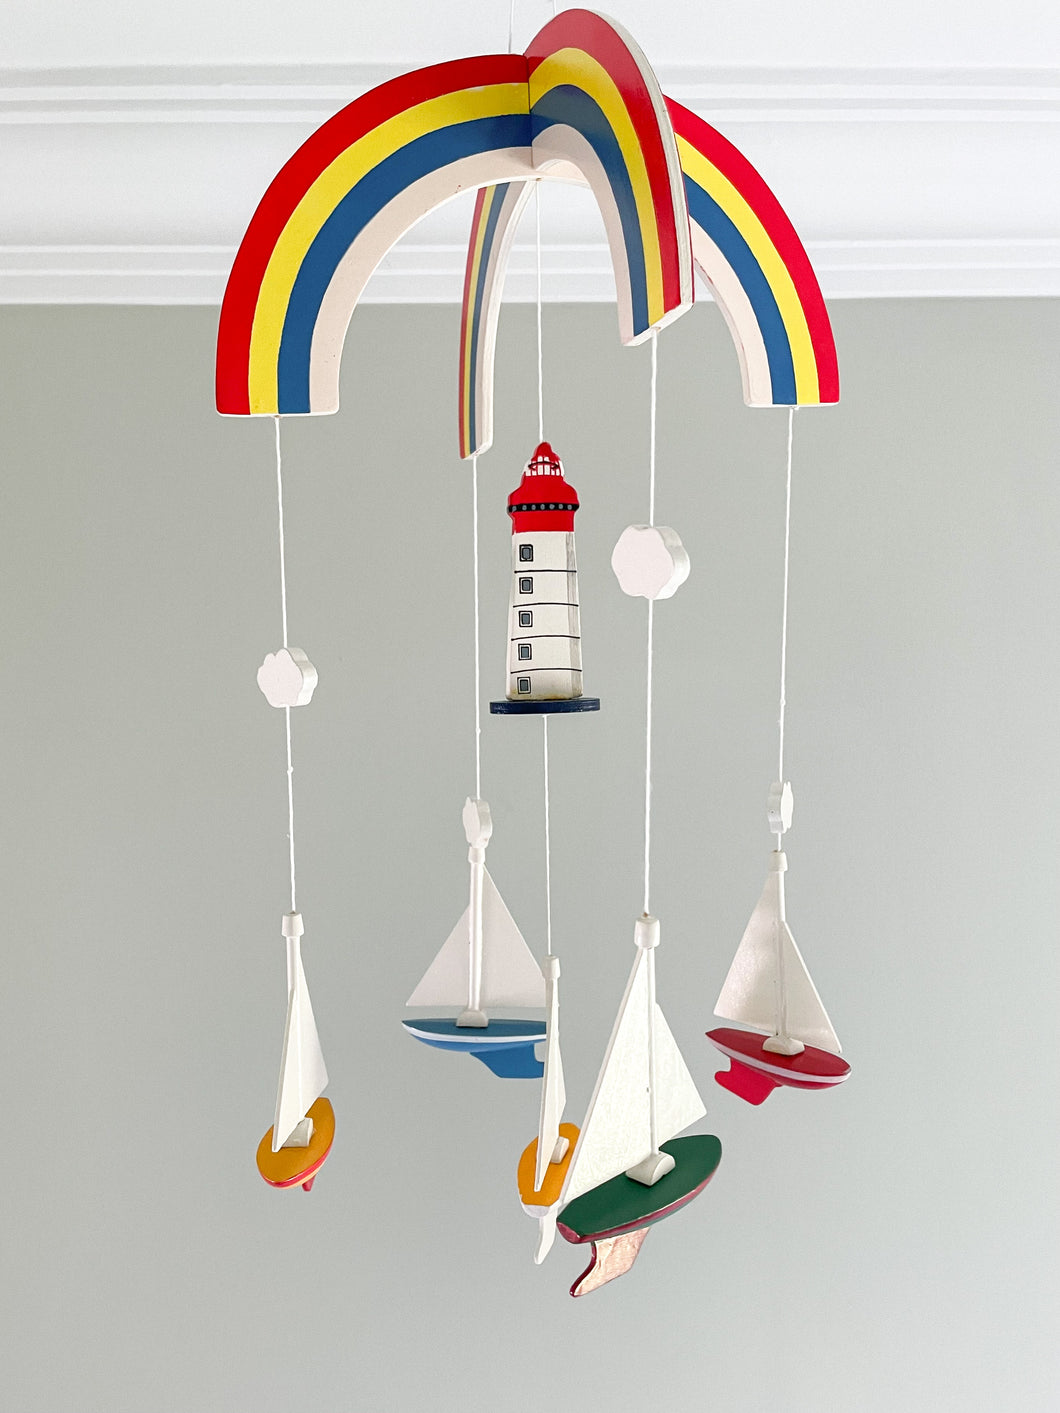 Vintage wooden mobile featuring rainbow, lighthouse and sailing boats/yachts - Moppet